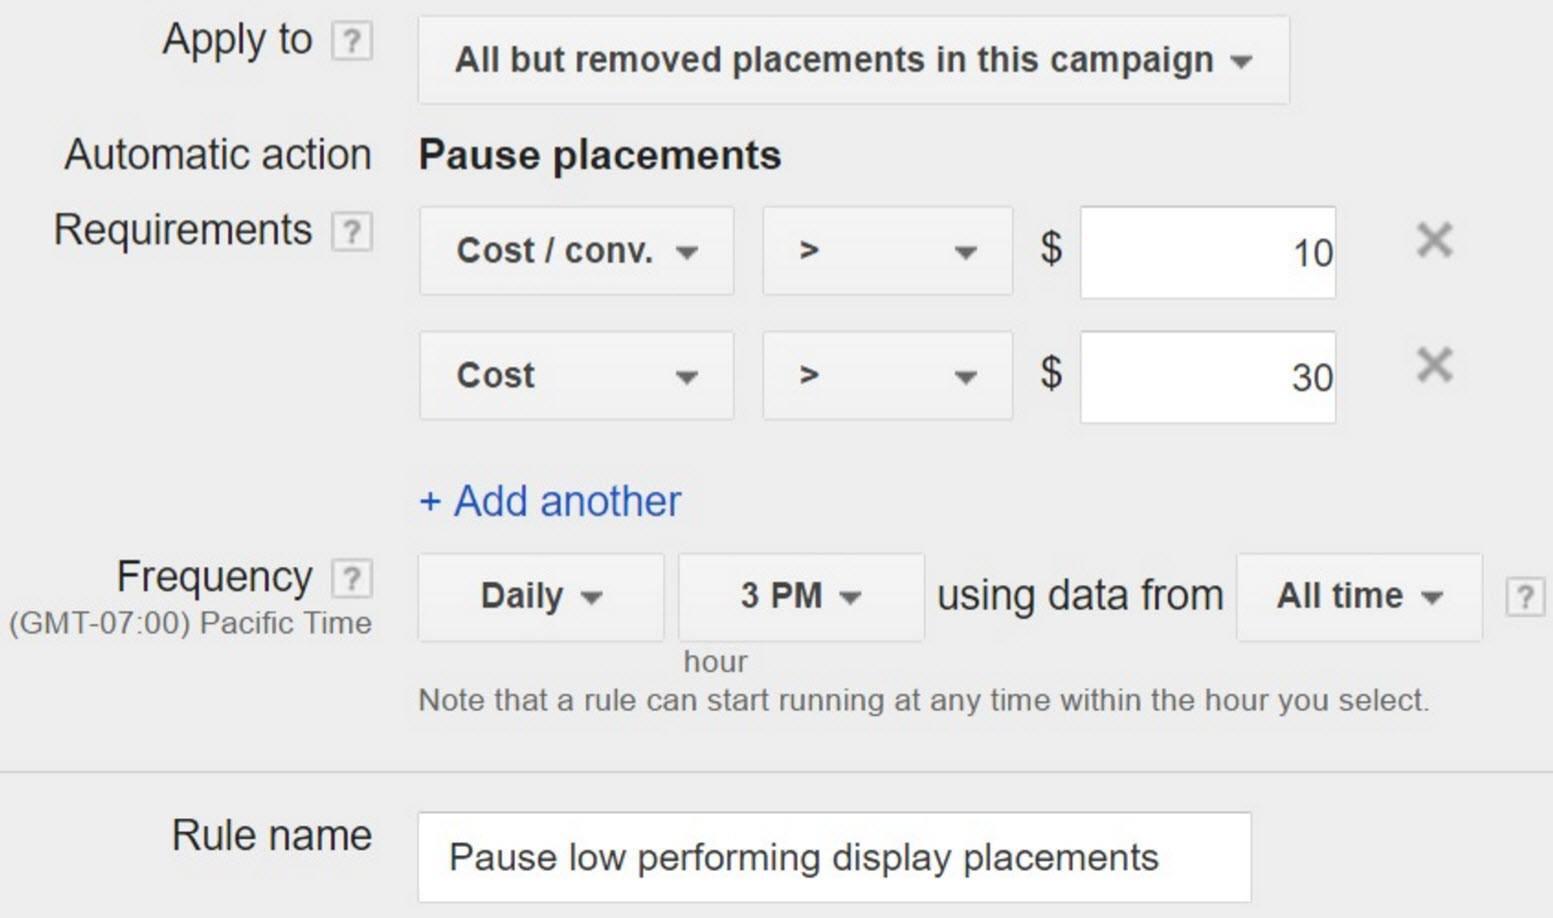 Pause low performing Google display placements